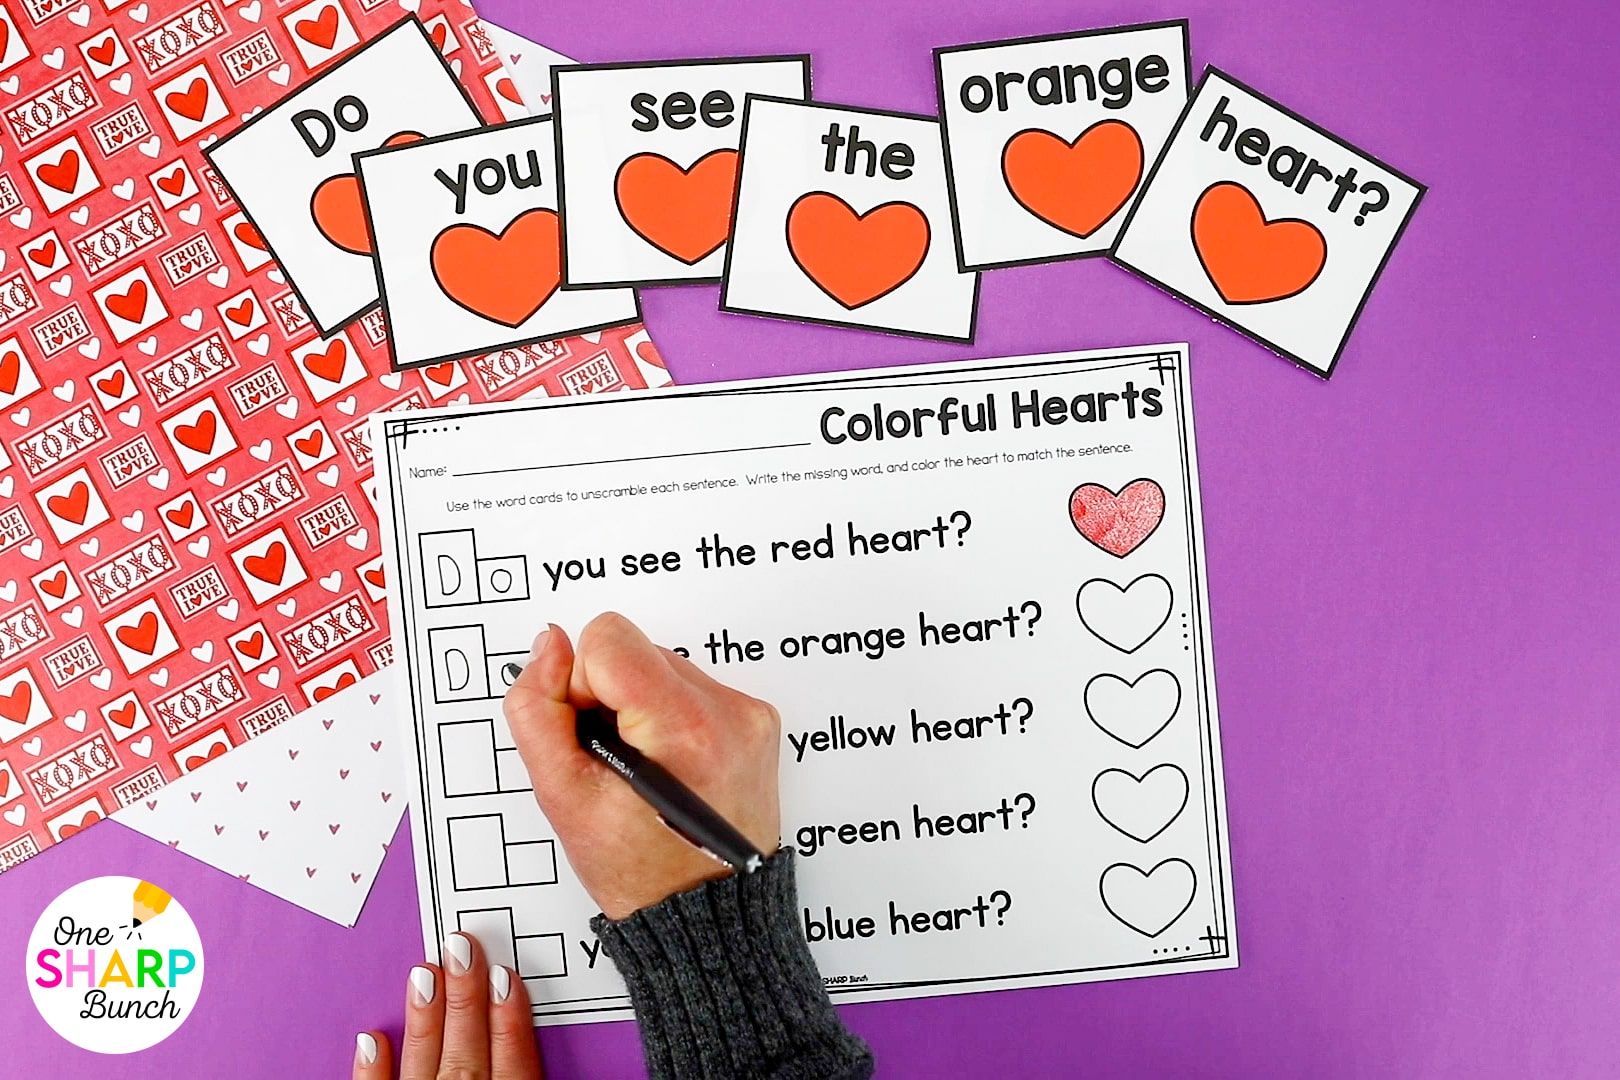 Celebrate Valentine’s Day, as you review math and literacy skills, with these engaging Valentine’s Day centers for kindergarten and first grade. These Valentine’s Day Escape Room activities can be used for a classroom Valentine’s Party or Valentine’s math and literacy centers. Students will practice syllables, beginning digraphs, decomposing numbers, 3D shapes, and more with these Valentine's Day activities. They will love these Valentine’s Day math centers and Valentine’s Day literacy centers!